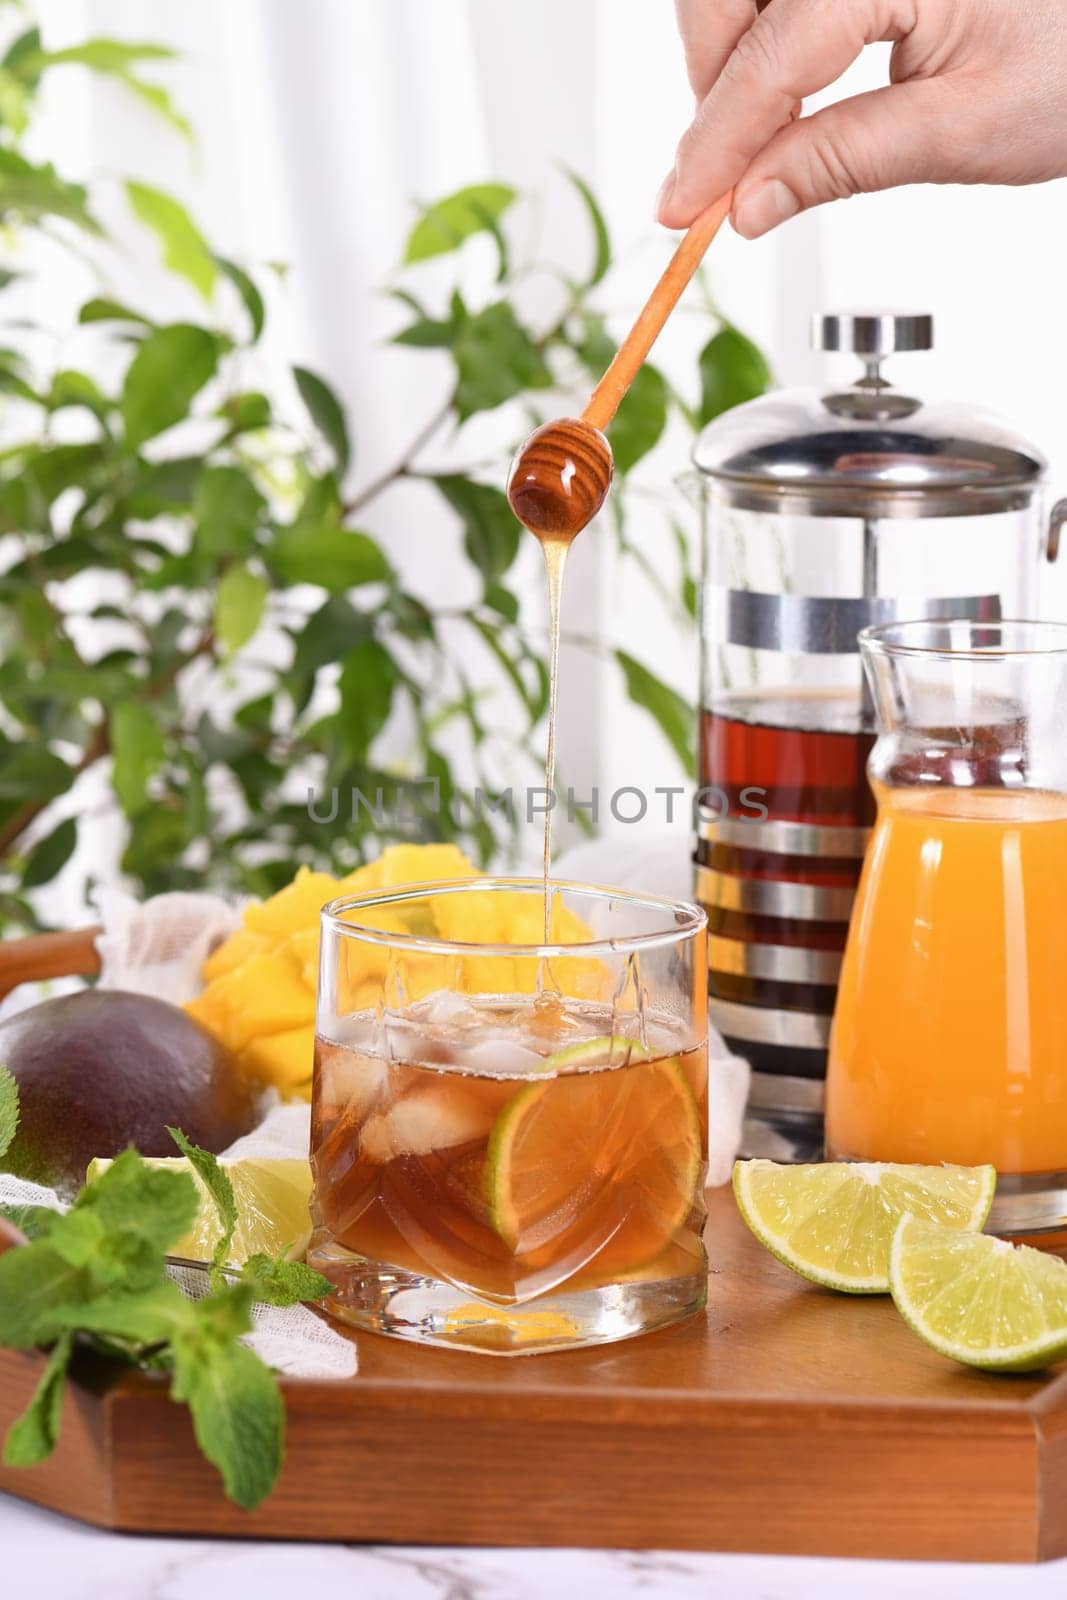 Mango iced tea with lime and mint has the perfect ratio of juice, tea and mint, sweetened with honey and so fresh and delicious. by Apolonia